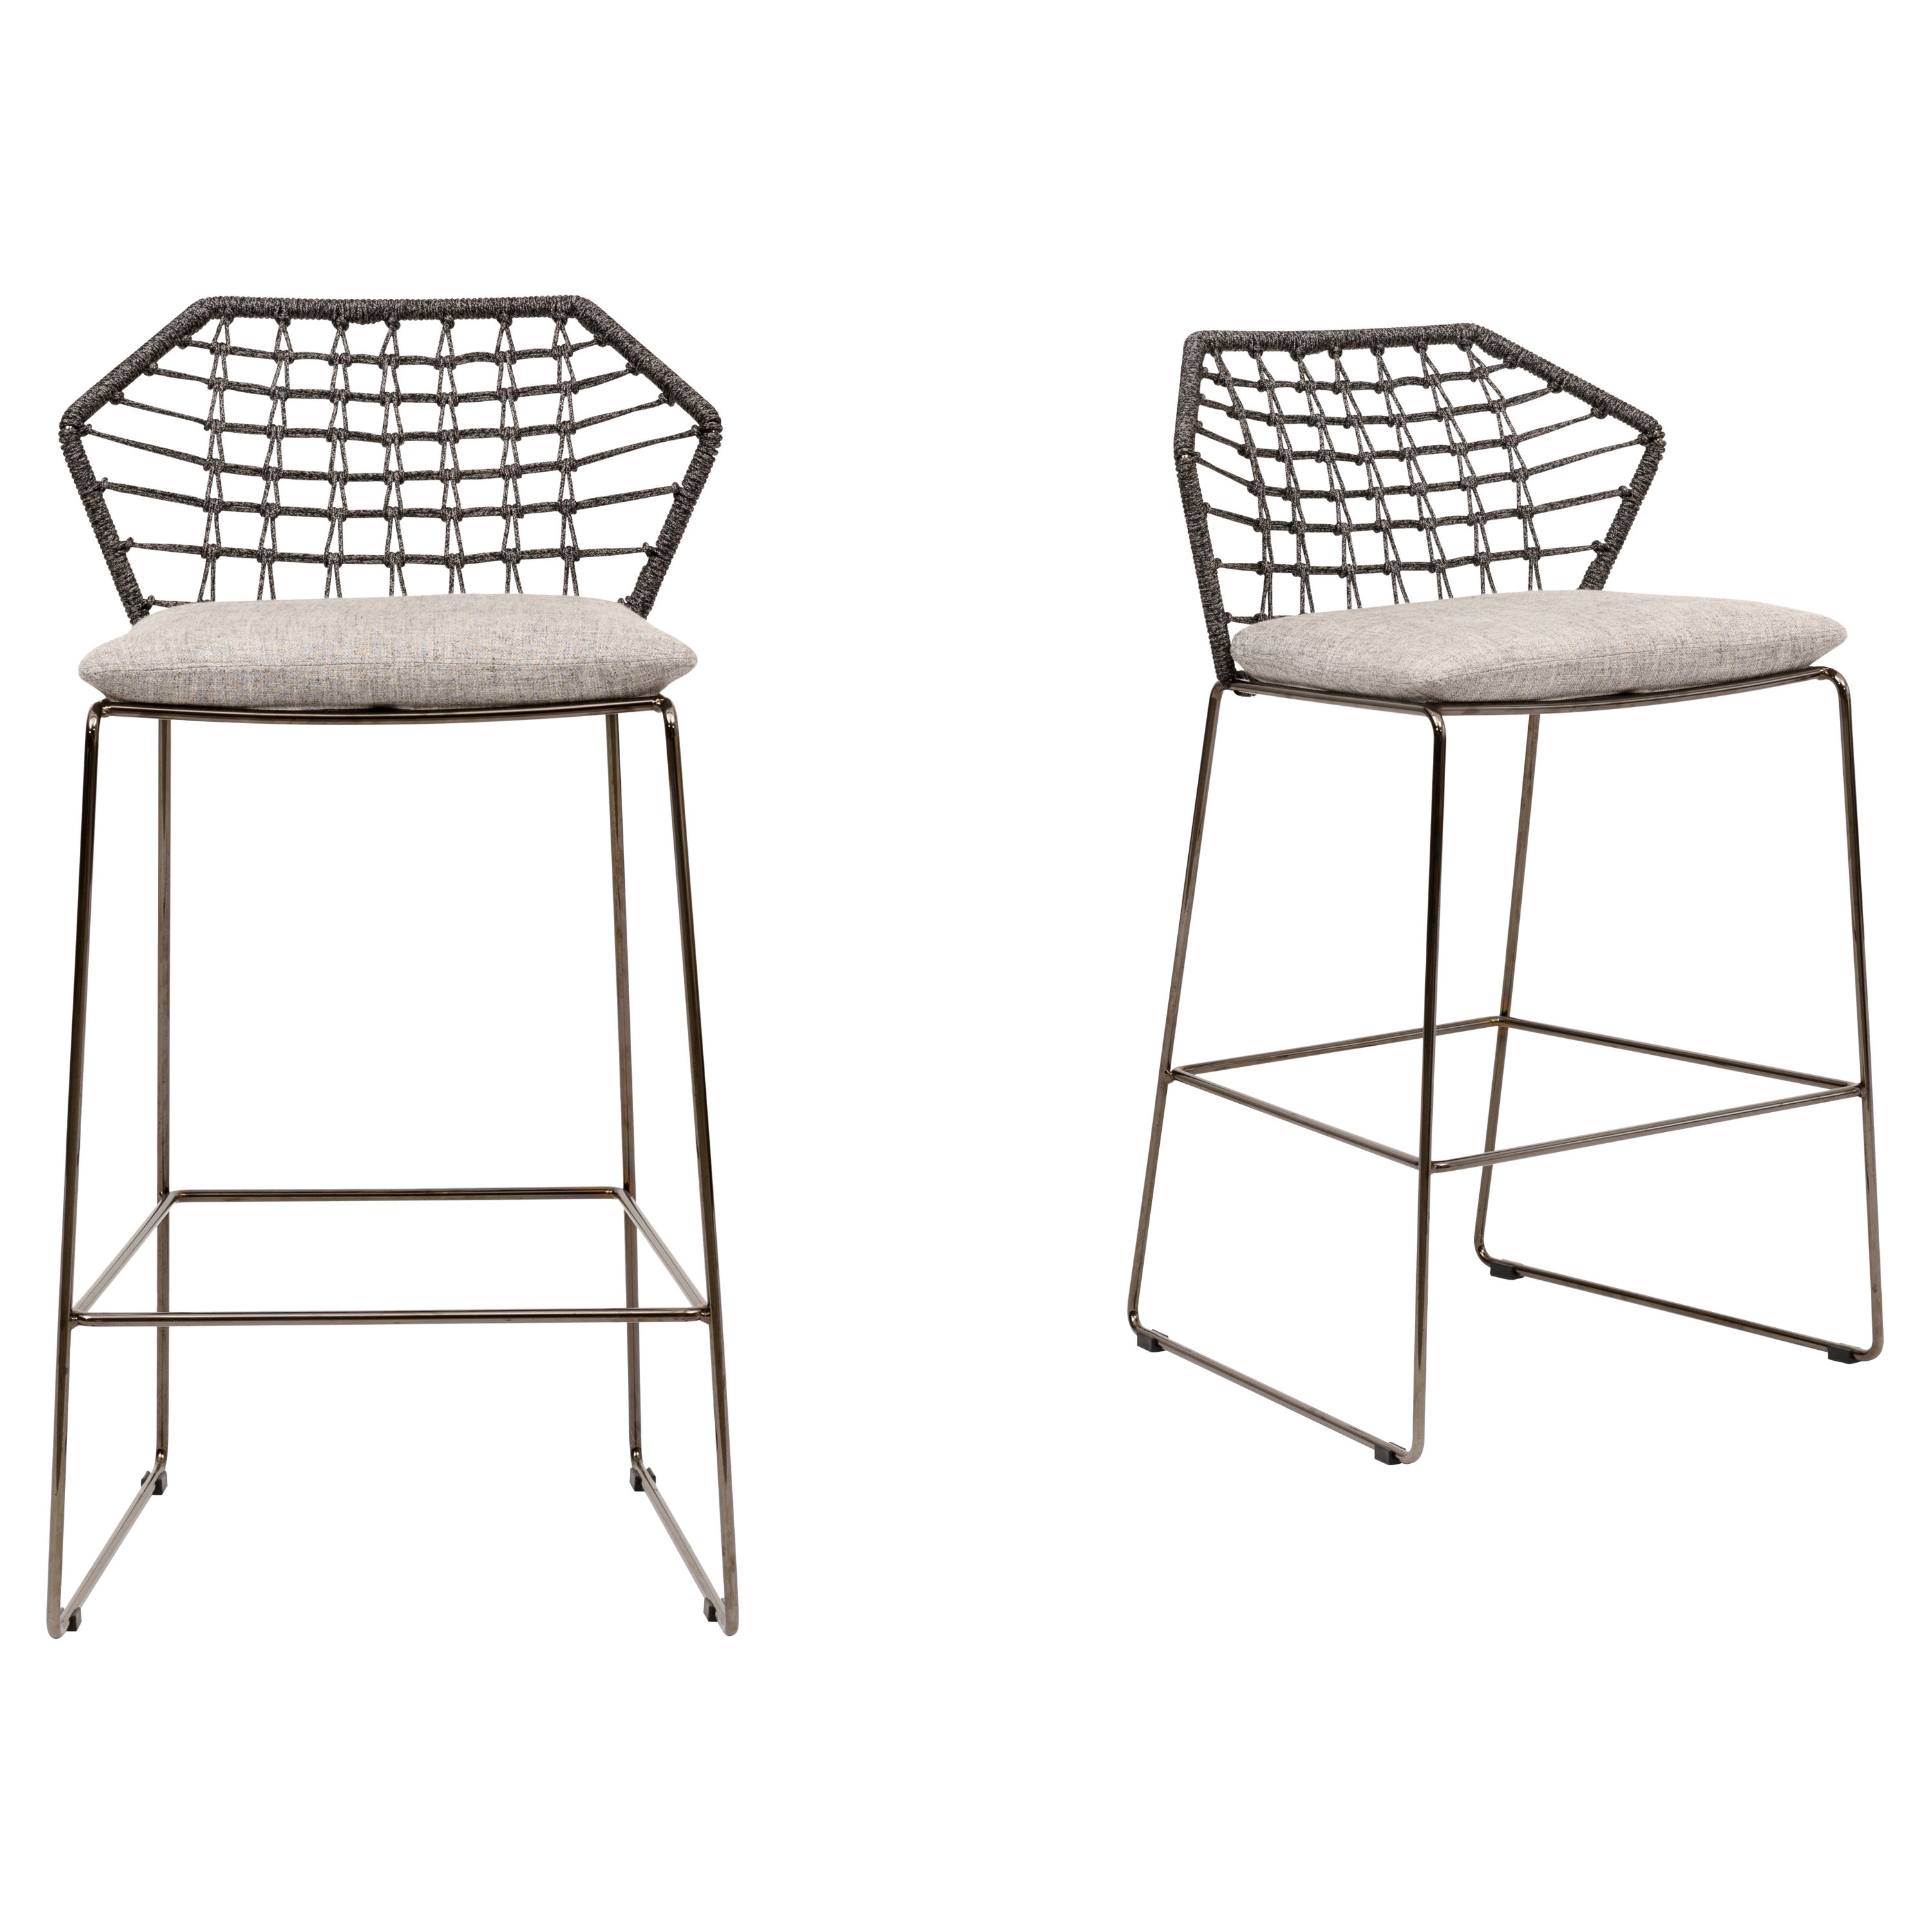 New York Soleil Low Stool with Grey Rope Frame & Black Legs by Sergio Bicego